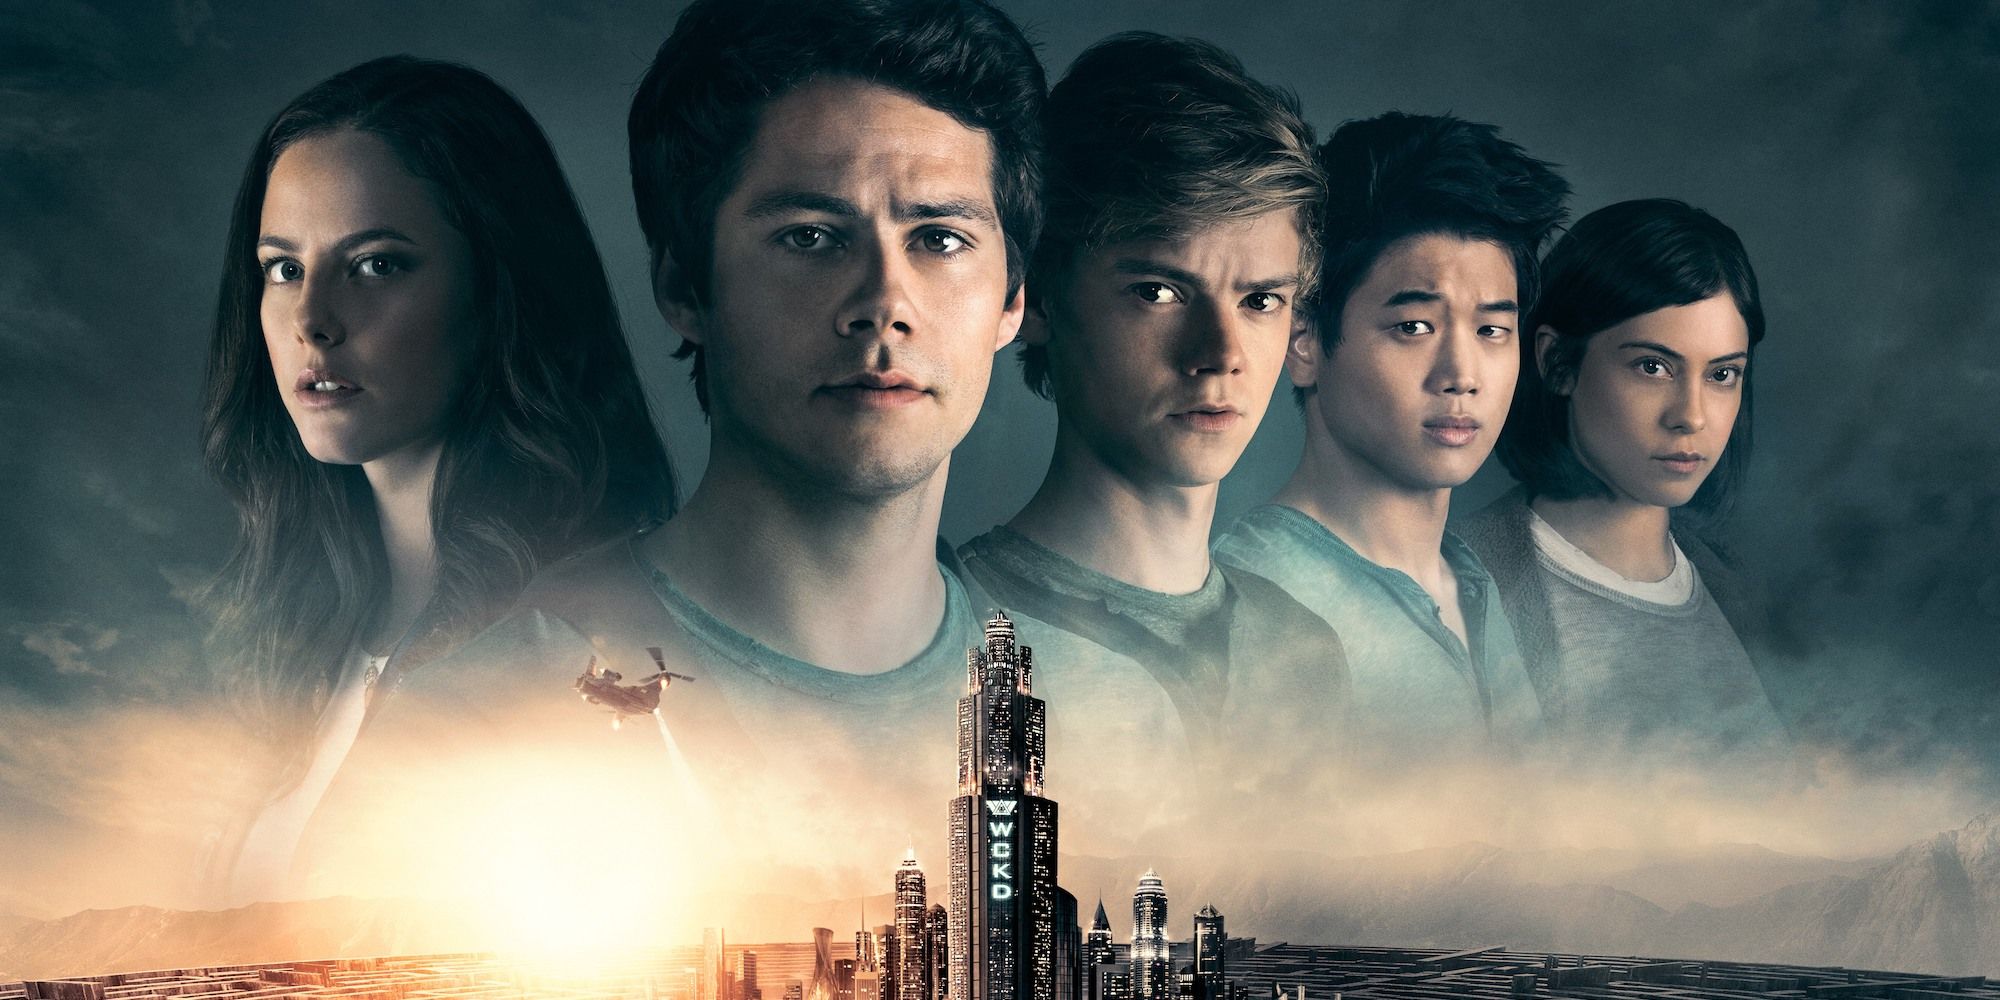 Does Maze Runner The Death Cure Have a PostCredits Scene